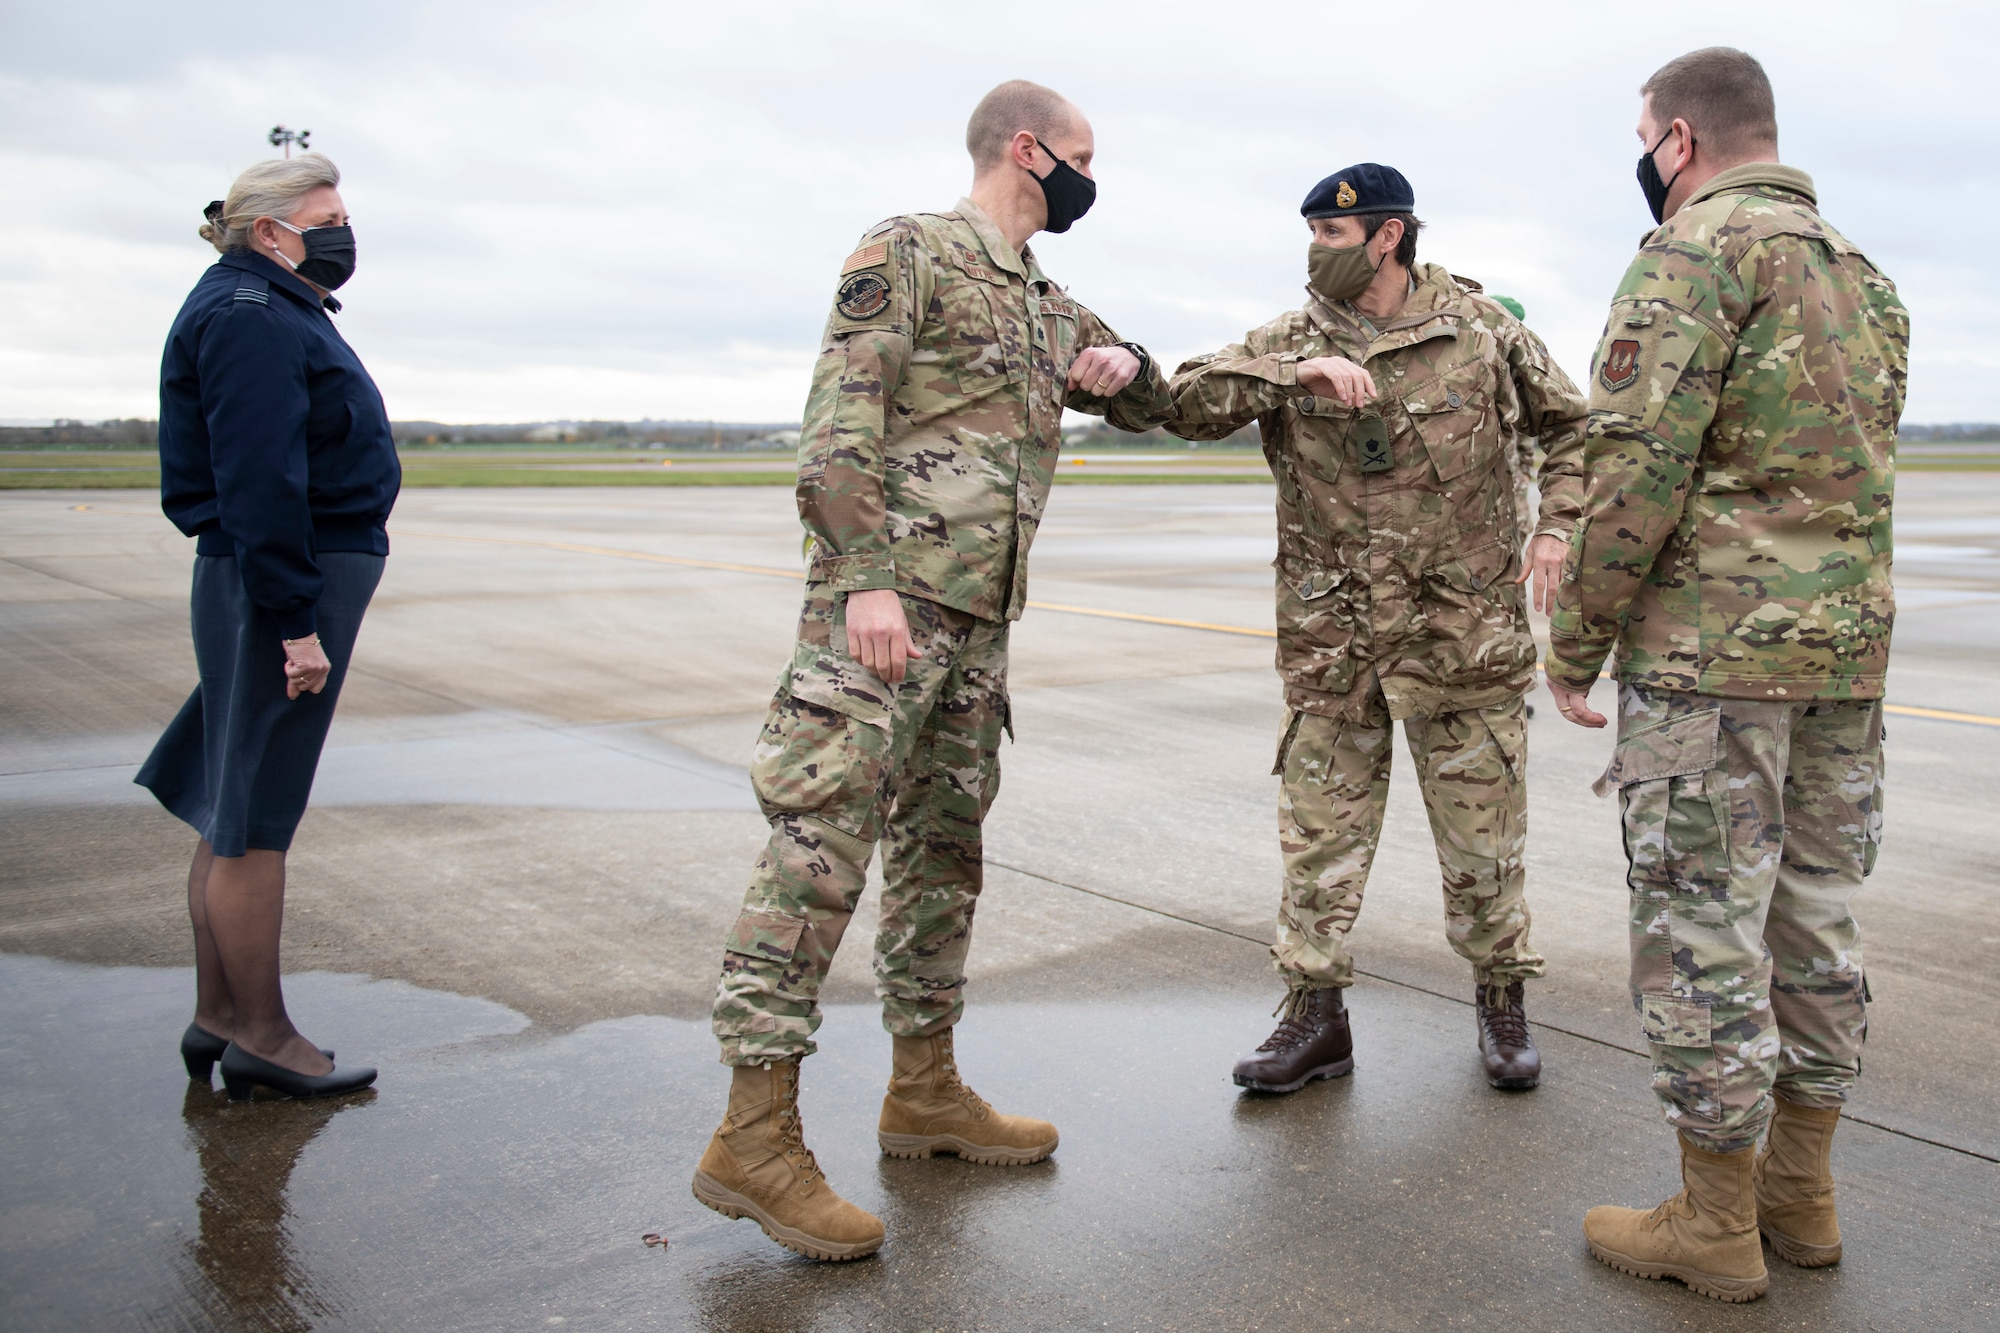 U.S. Air Force Lt. Col. Joseph Knothe, center left, 420th Air Base Squadron commander, welcomes British Army Lt. Gen. Ivan B. L. Jones CB, Commander Field Army, center right, at RAF Fairford, England, Nov. 17, 2020, during NATO Exercise Loyal Leda 2020 (LOLE20). Allied Land Command (LANDCOM) conducted a combat readiness evaluation on the NATO Headquarters Allied Rapid Reaction Corp (ARRC) during LOLE20, which took place at RAF Fairford and South Cerney, England, Nov. 9-19, 2020. This was a complex multi-domain exercise designed to test the war-fighting capabilities of the ARRC in a COVID-19 environment including combat operations. LOLE20 was a key NATO exercise to validate and certify the Gloucester-based ARRC as a NATO war-fighting corps at full operational readiness, capable of commanding up to 120,000 multinational troops across a full spectrum of military operations. (U.S. Air Force photo by Senior Airman Jennifer Zima)